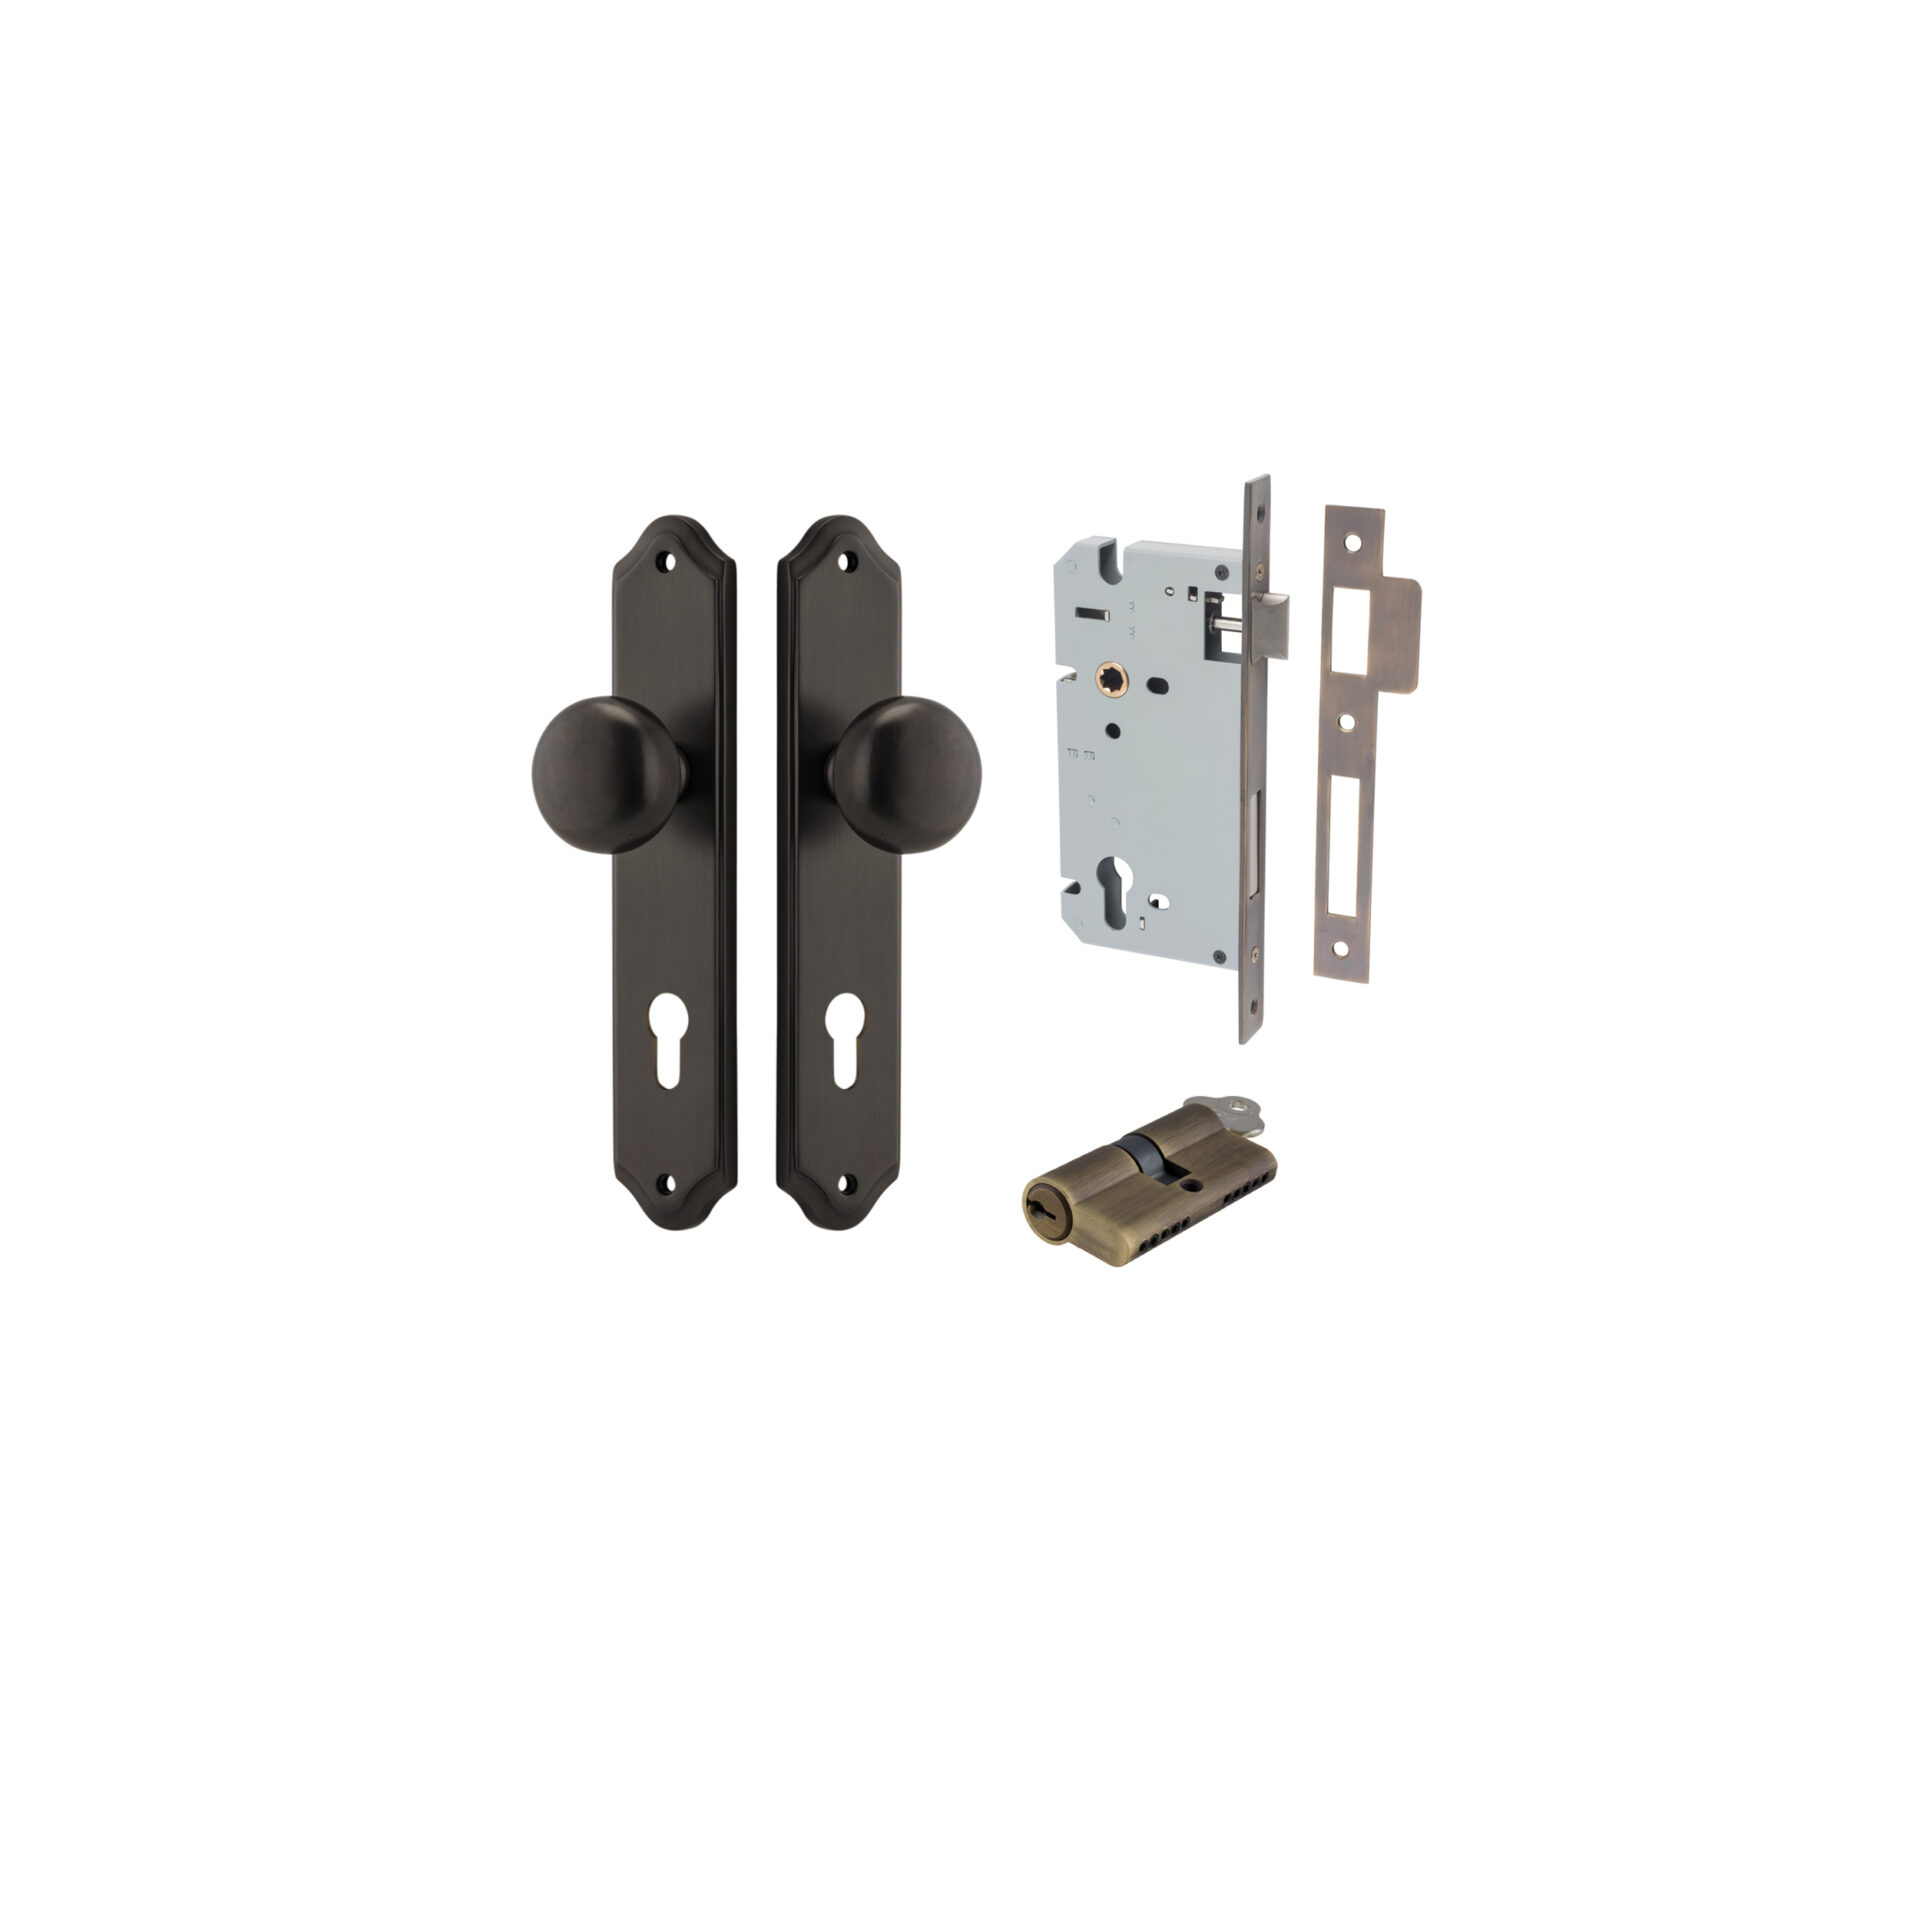 Cambridge Knob - Shouldered Backplate Entrance Kit with High Security Lock